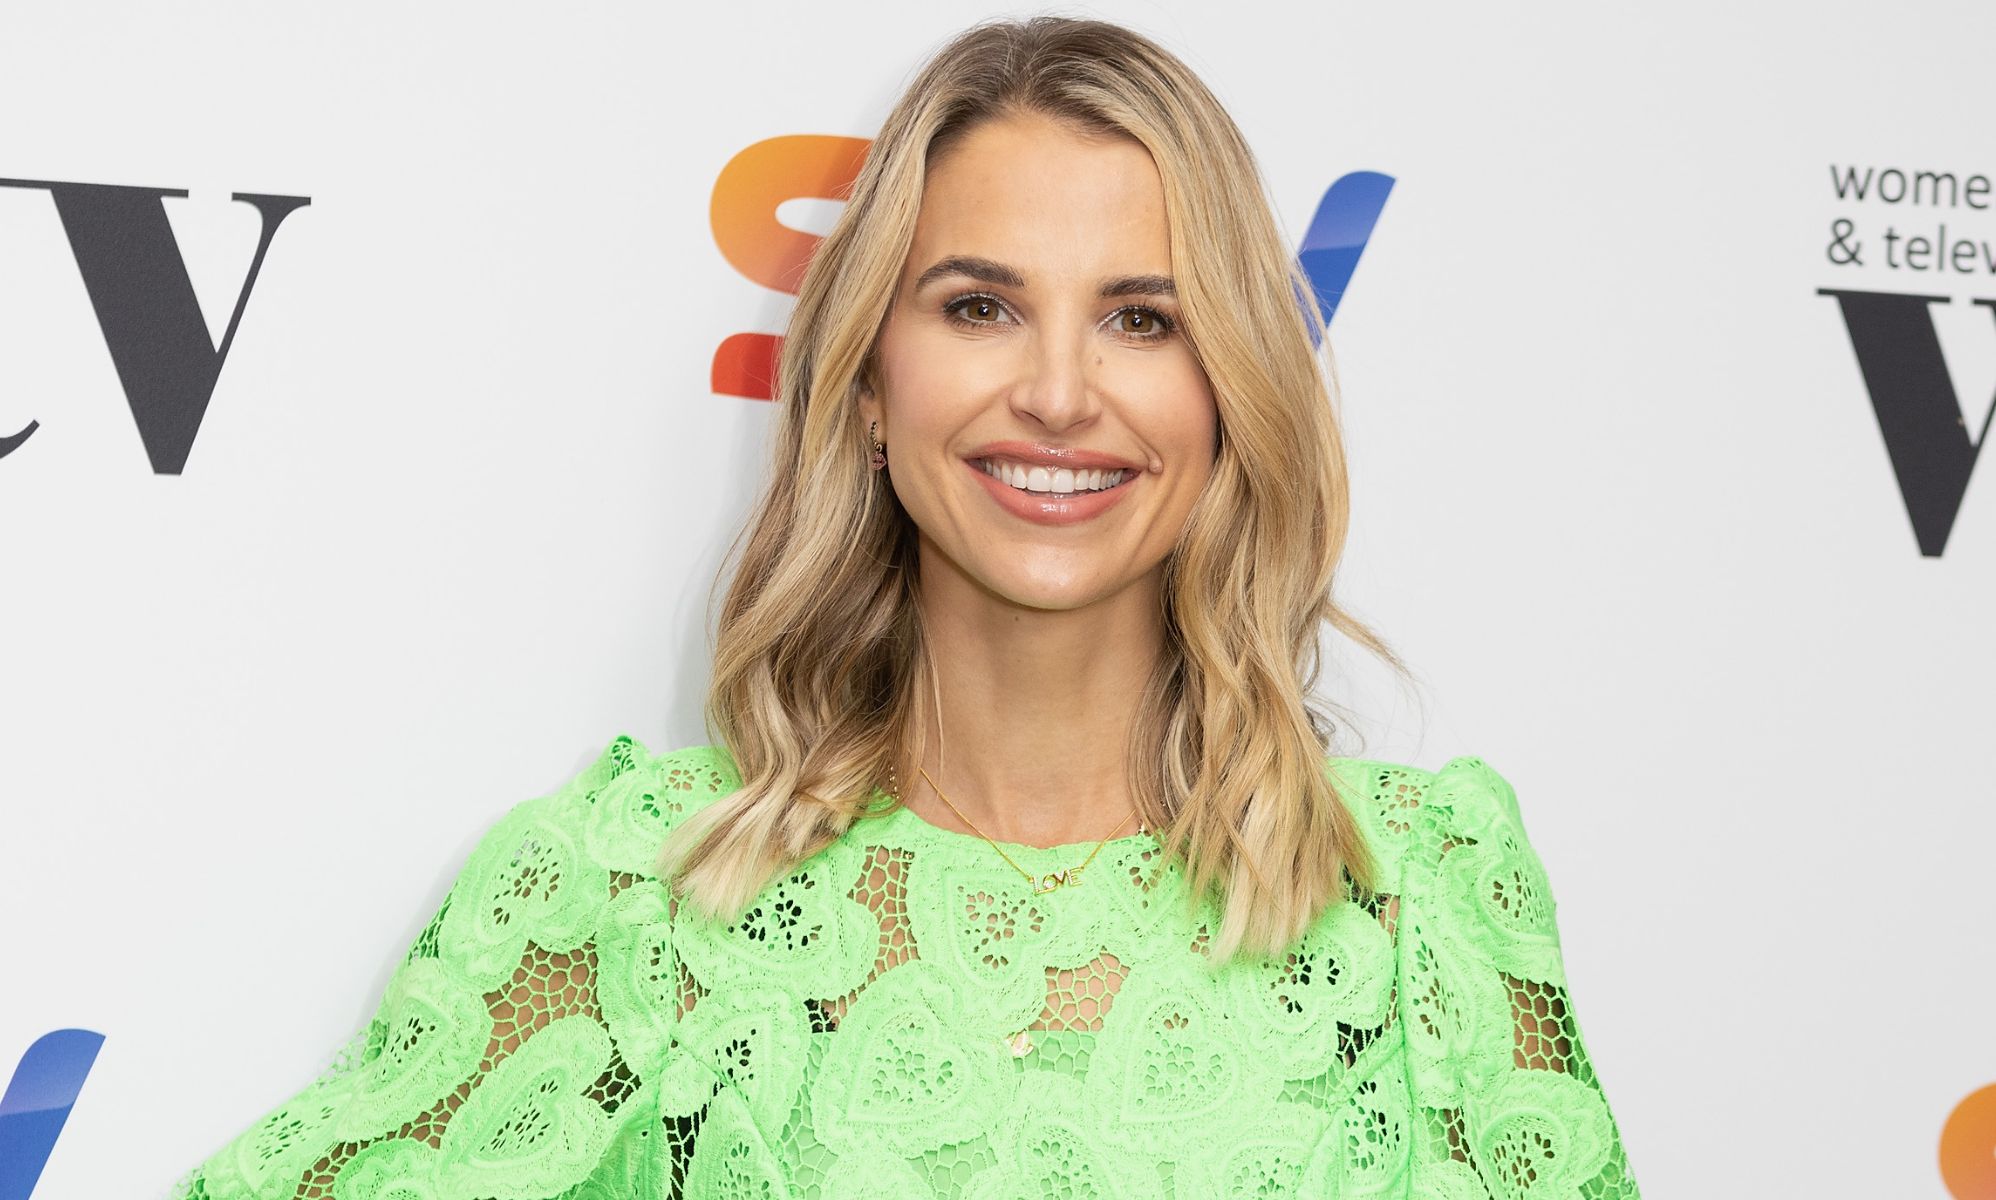 Vogue Williams refused Qatar World Cup invite due to gay sister